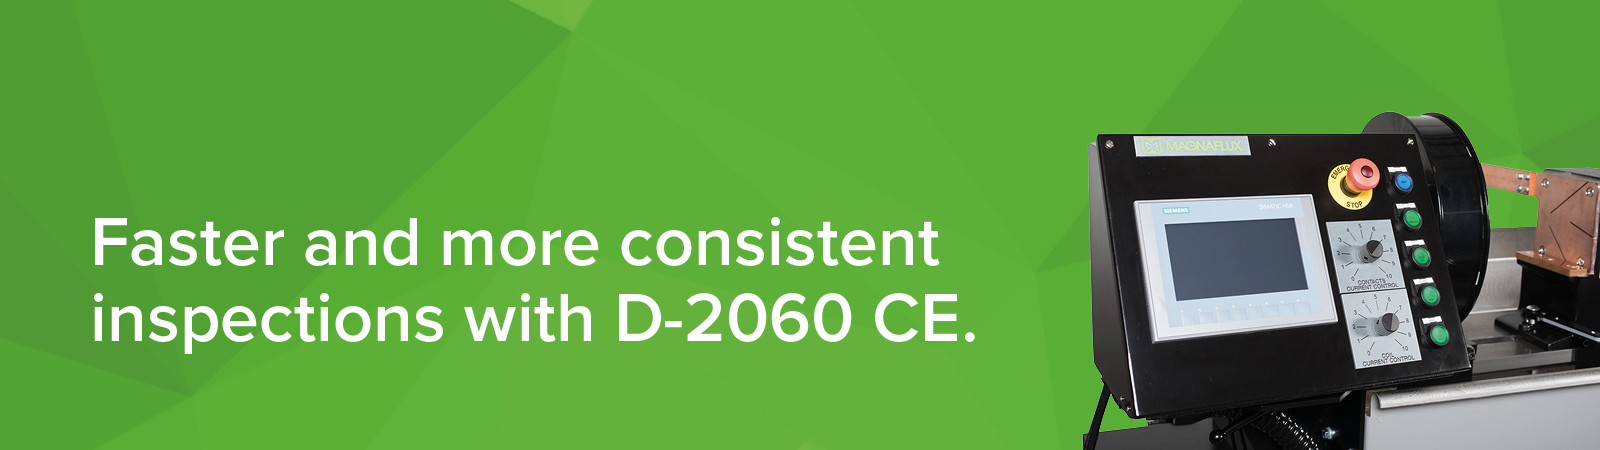 Faster and more consistent inspections with D-2060 CE